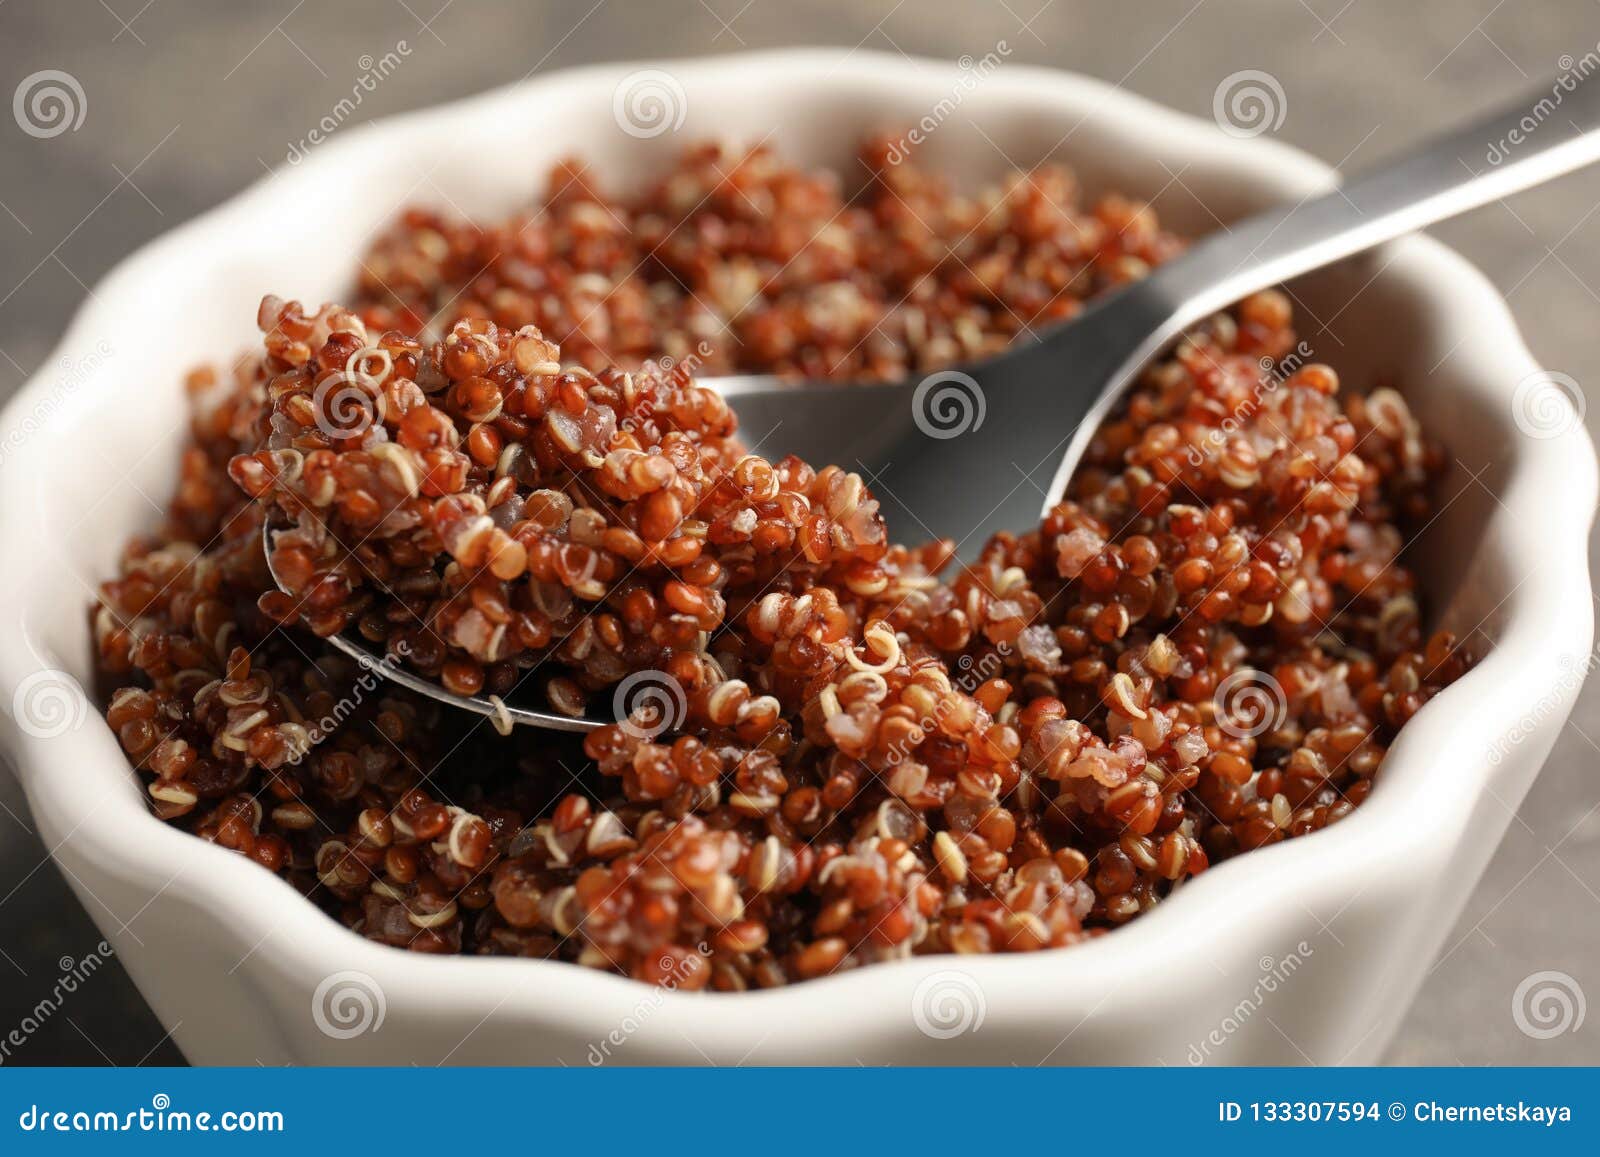 Closeup View of Cooked Red in Bowl Stock Photo - Image recipe, object: 133307594